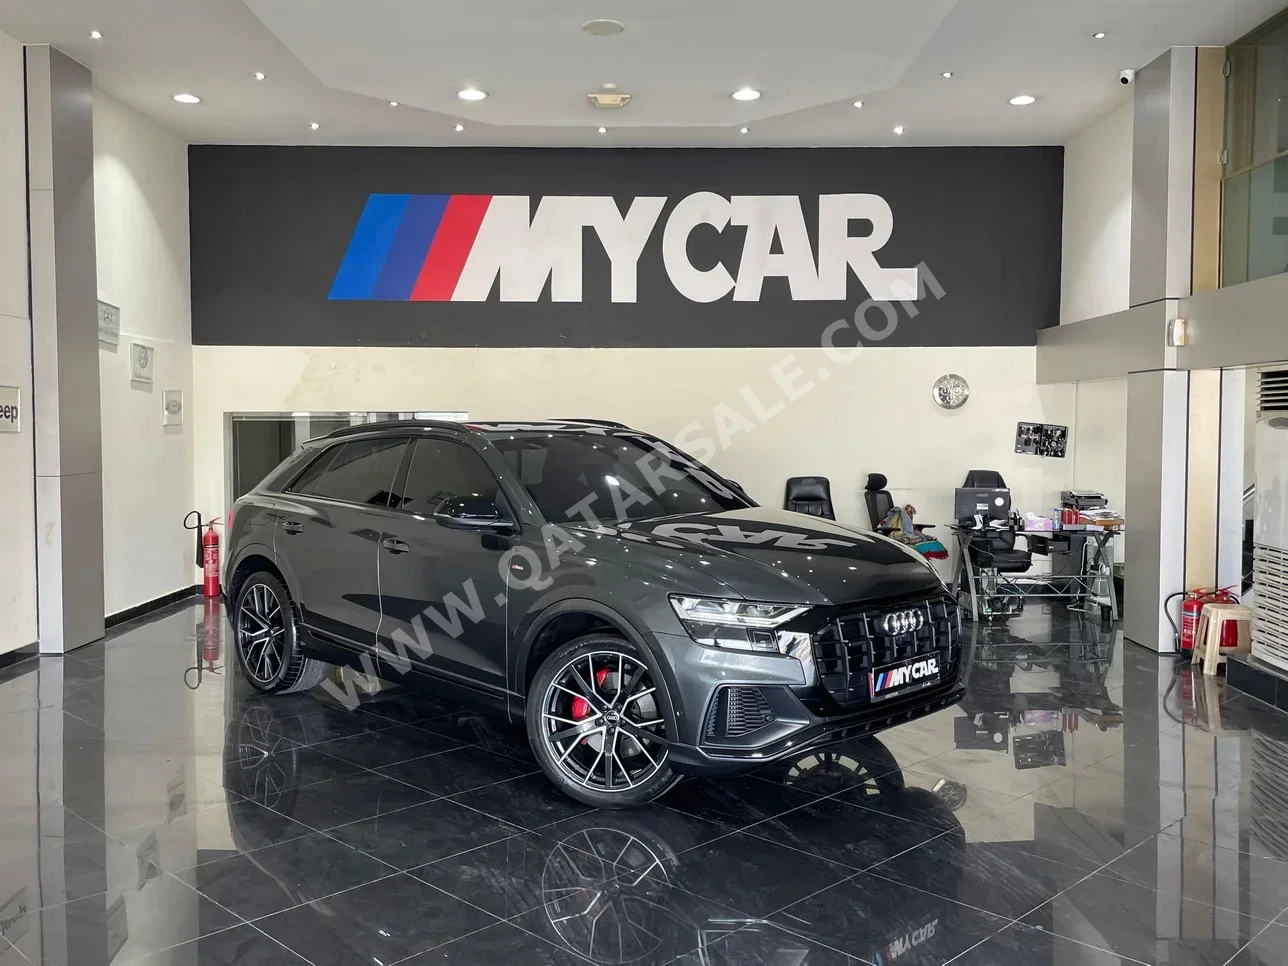 Audi  Q8  S-Line  2019  Automatic  86,000 Km  6 Cylinder  All Wheel Drive (AWD)  SUV  Gray  With Warranty